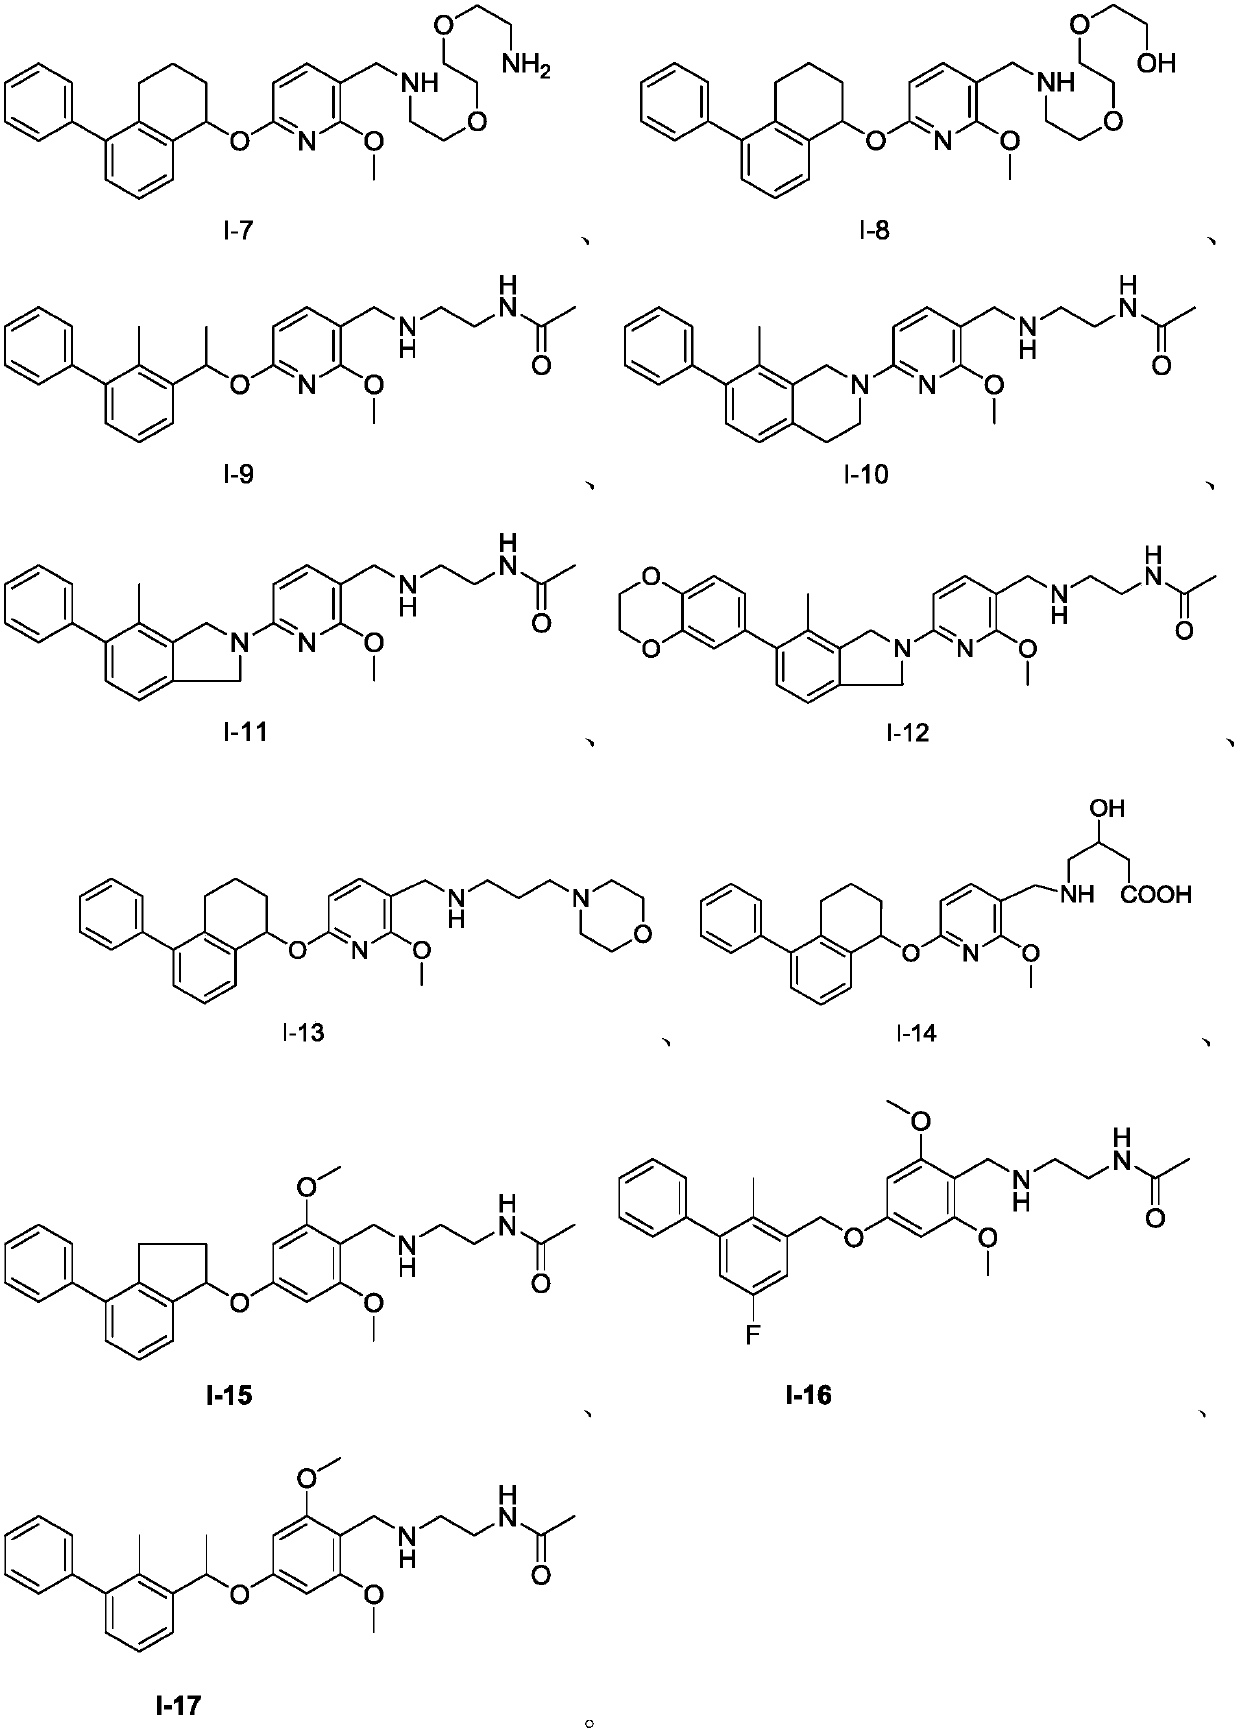 Aromatic ring-containing compound and application thereof